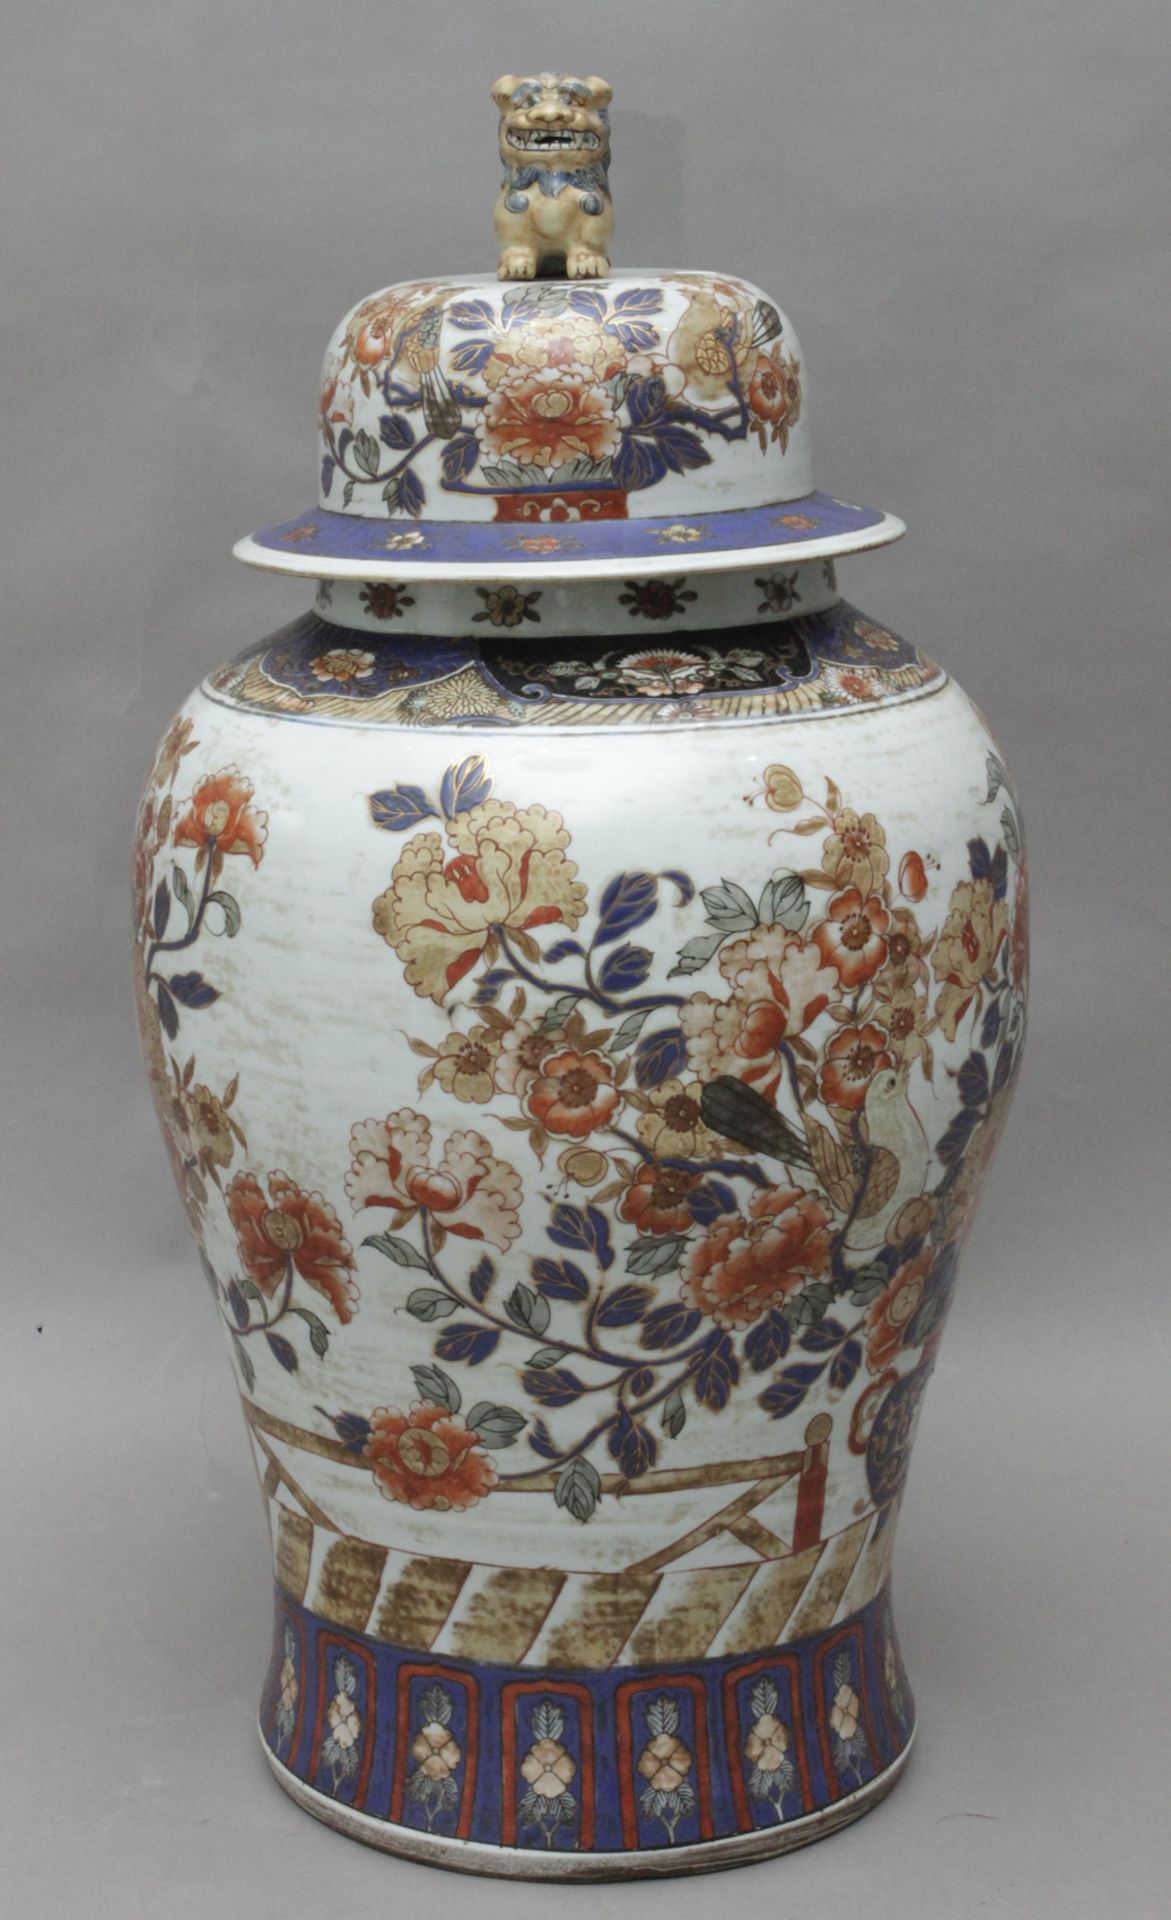 A second half of 20th century Chinese porcelain vase and cover